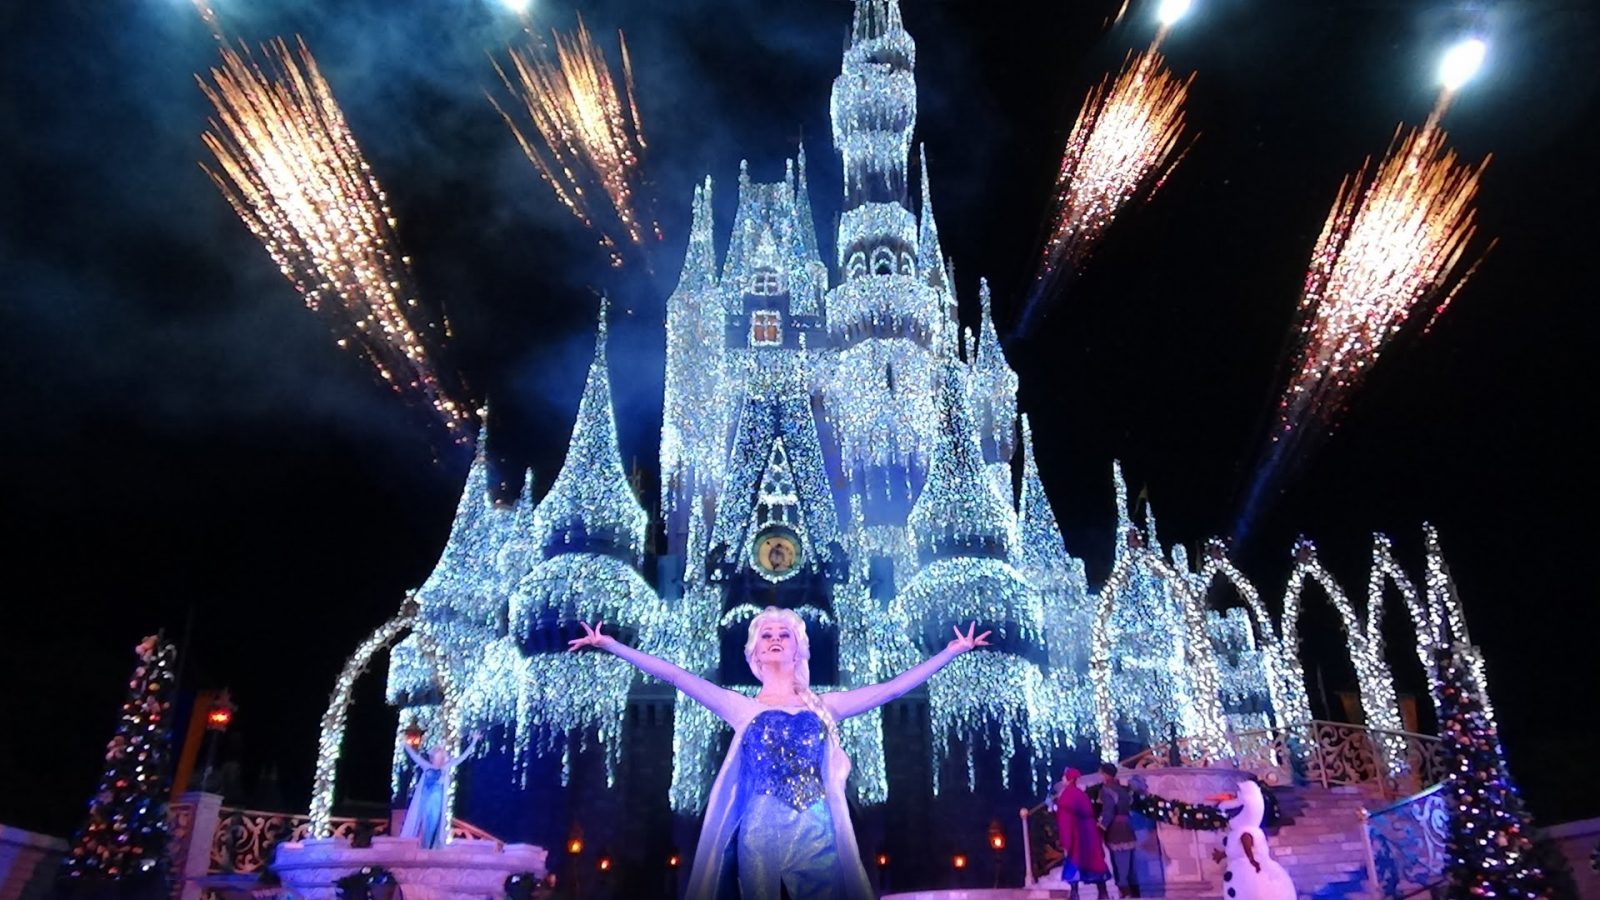 Elsa and friends in front of the decorated Cinderella Castle for a Disney Christmas celebration